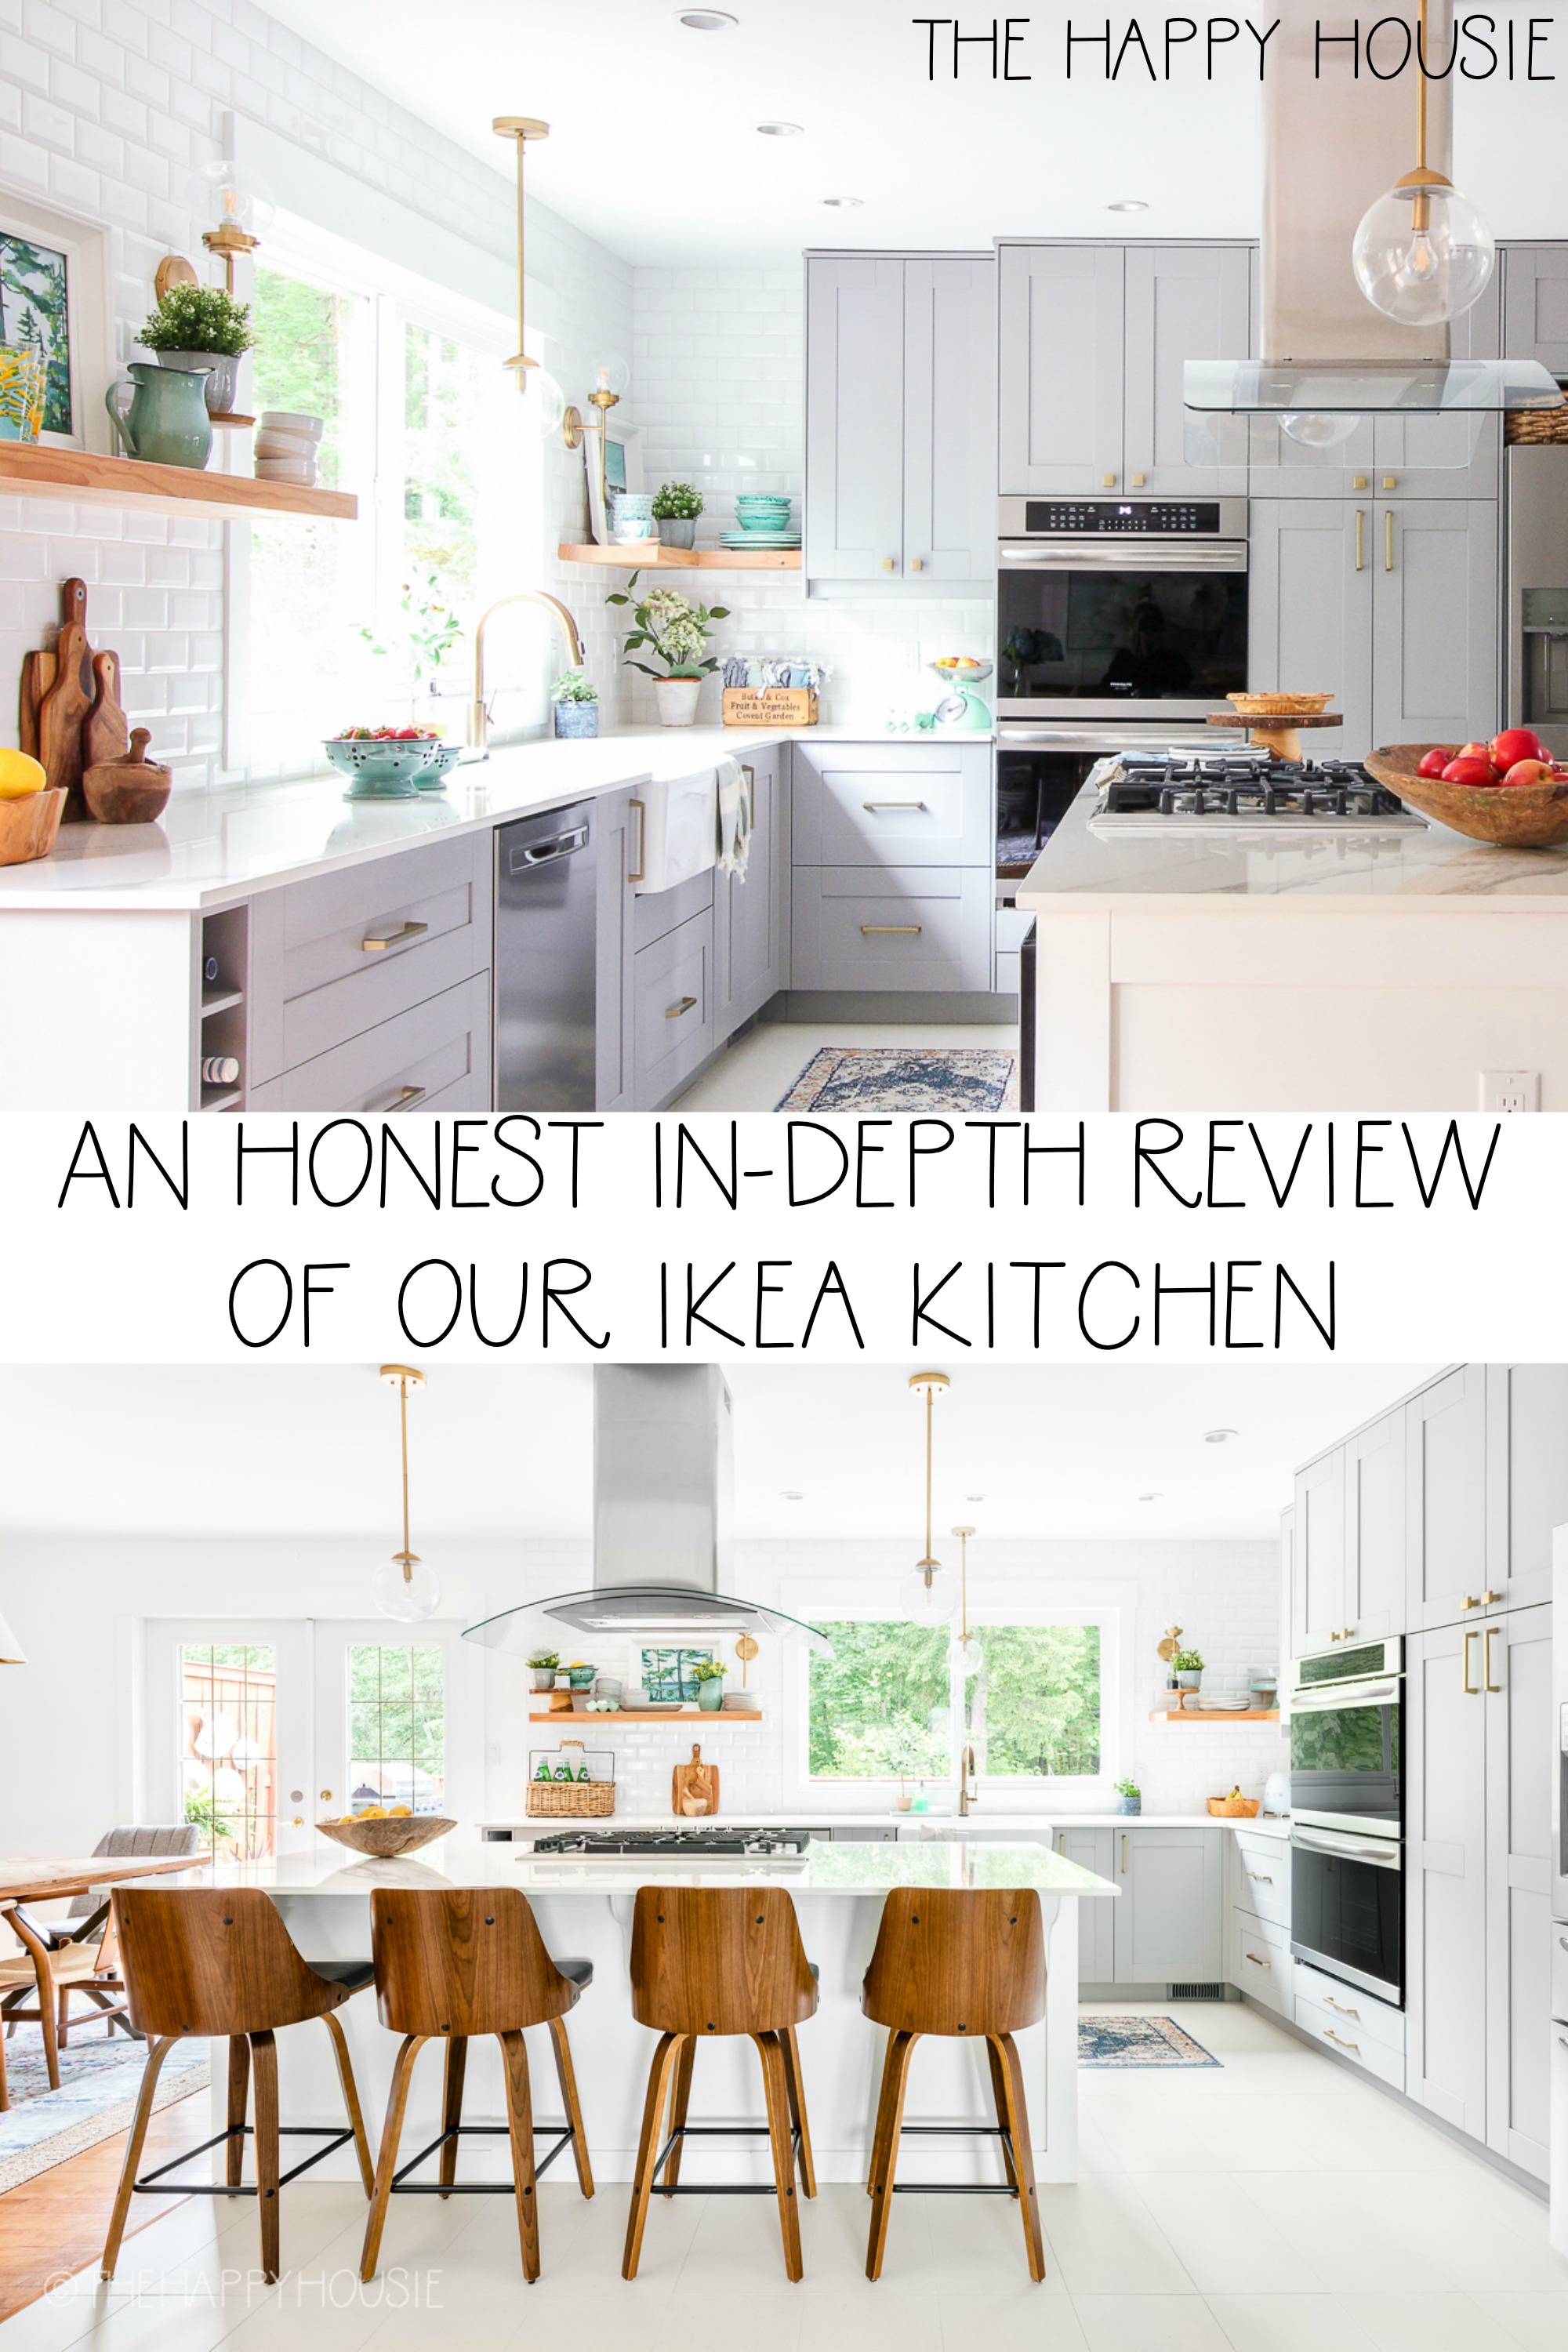 An Honest In-Depth Review of Our Ikea Kitchen  The Happy Housie